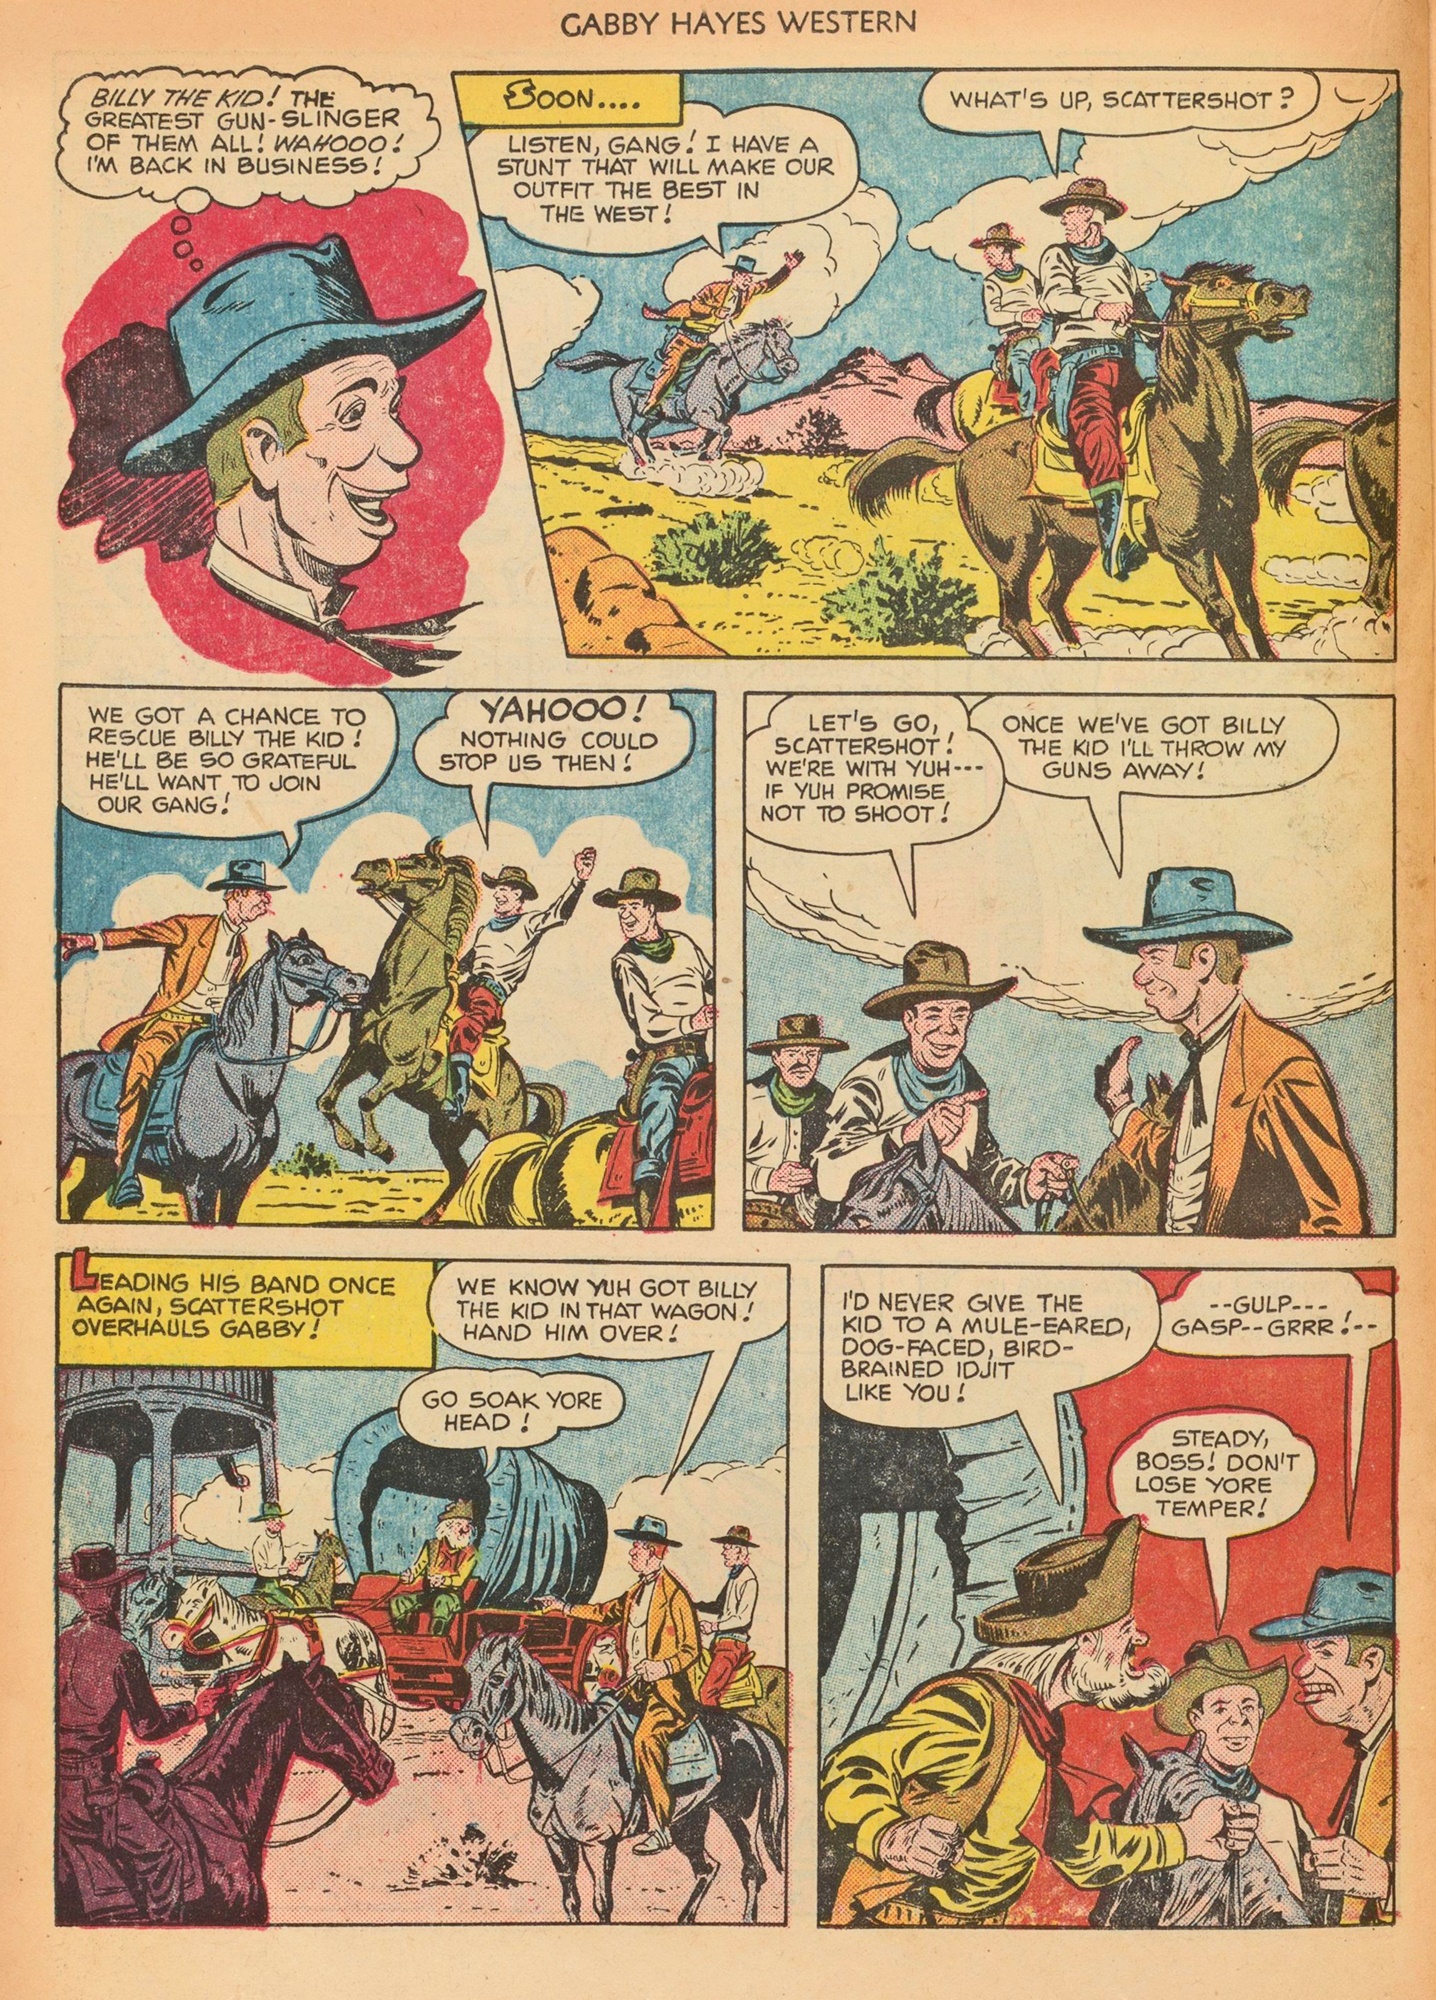 Read online Gabby Hayes Western comic -  Issue #32 - 22